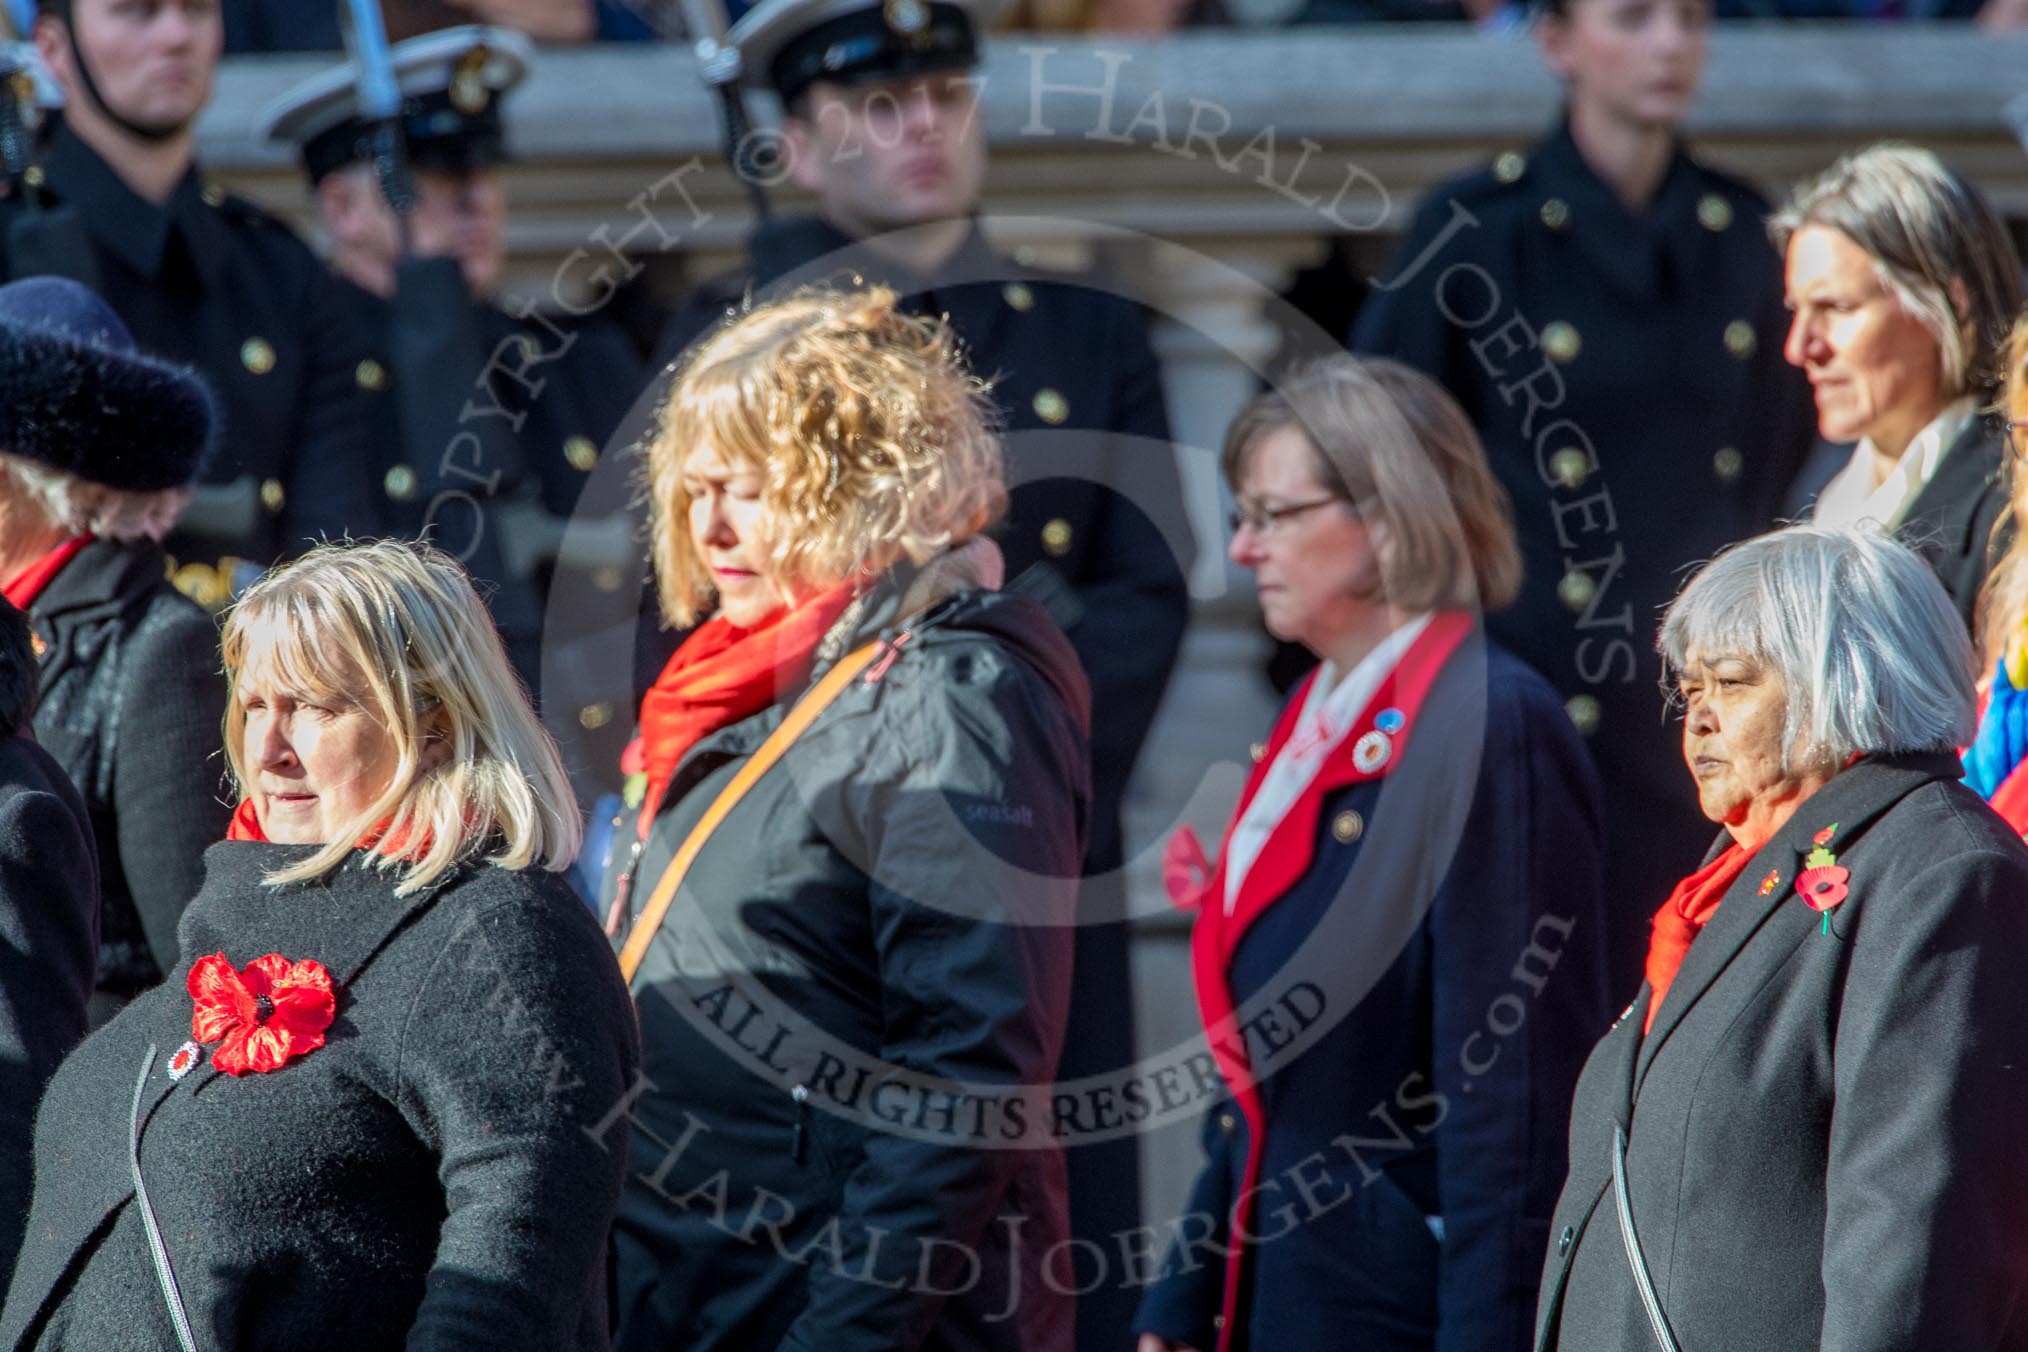 War Widow RAF (Group D10, 4 members) during the Royal British Legion March Past on Remembrance Sunday at the Cenotaph, Whitehall, Westminster, London, 11 November 2018, 12:21.